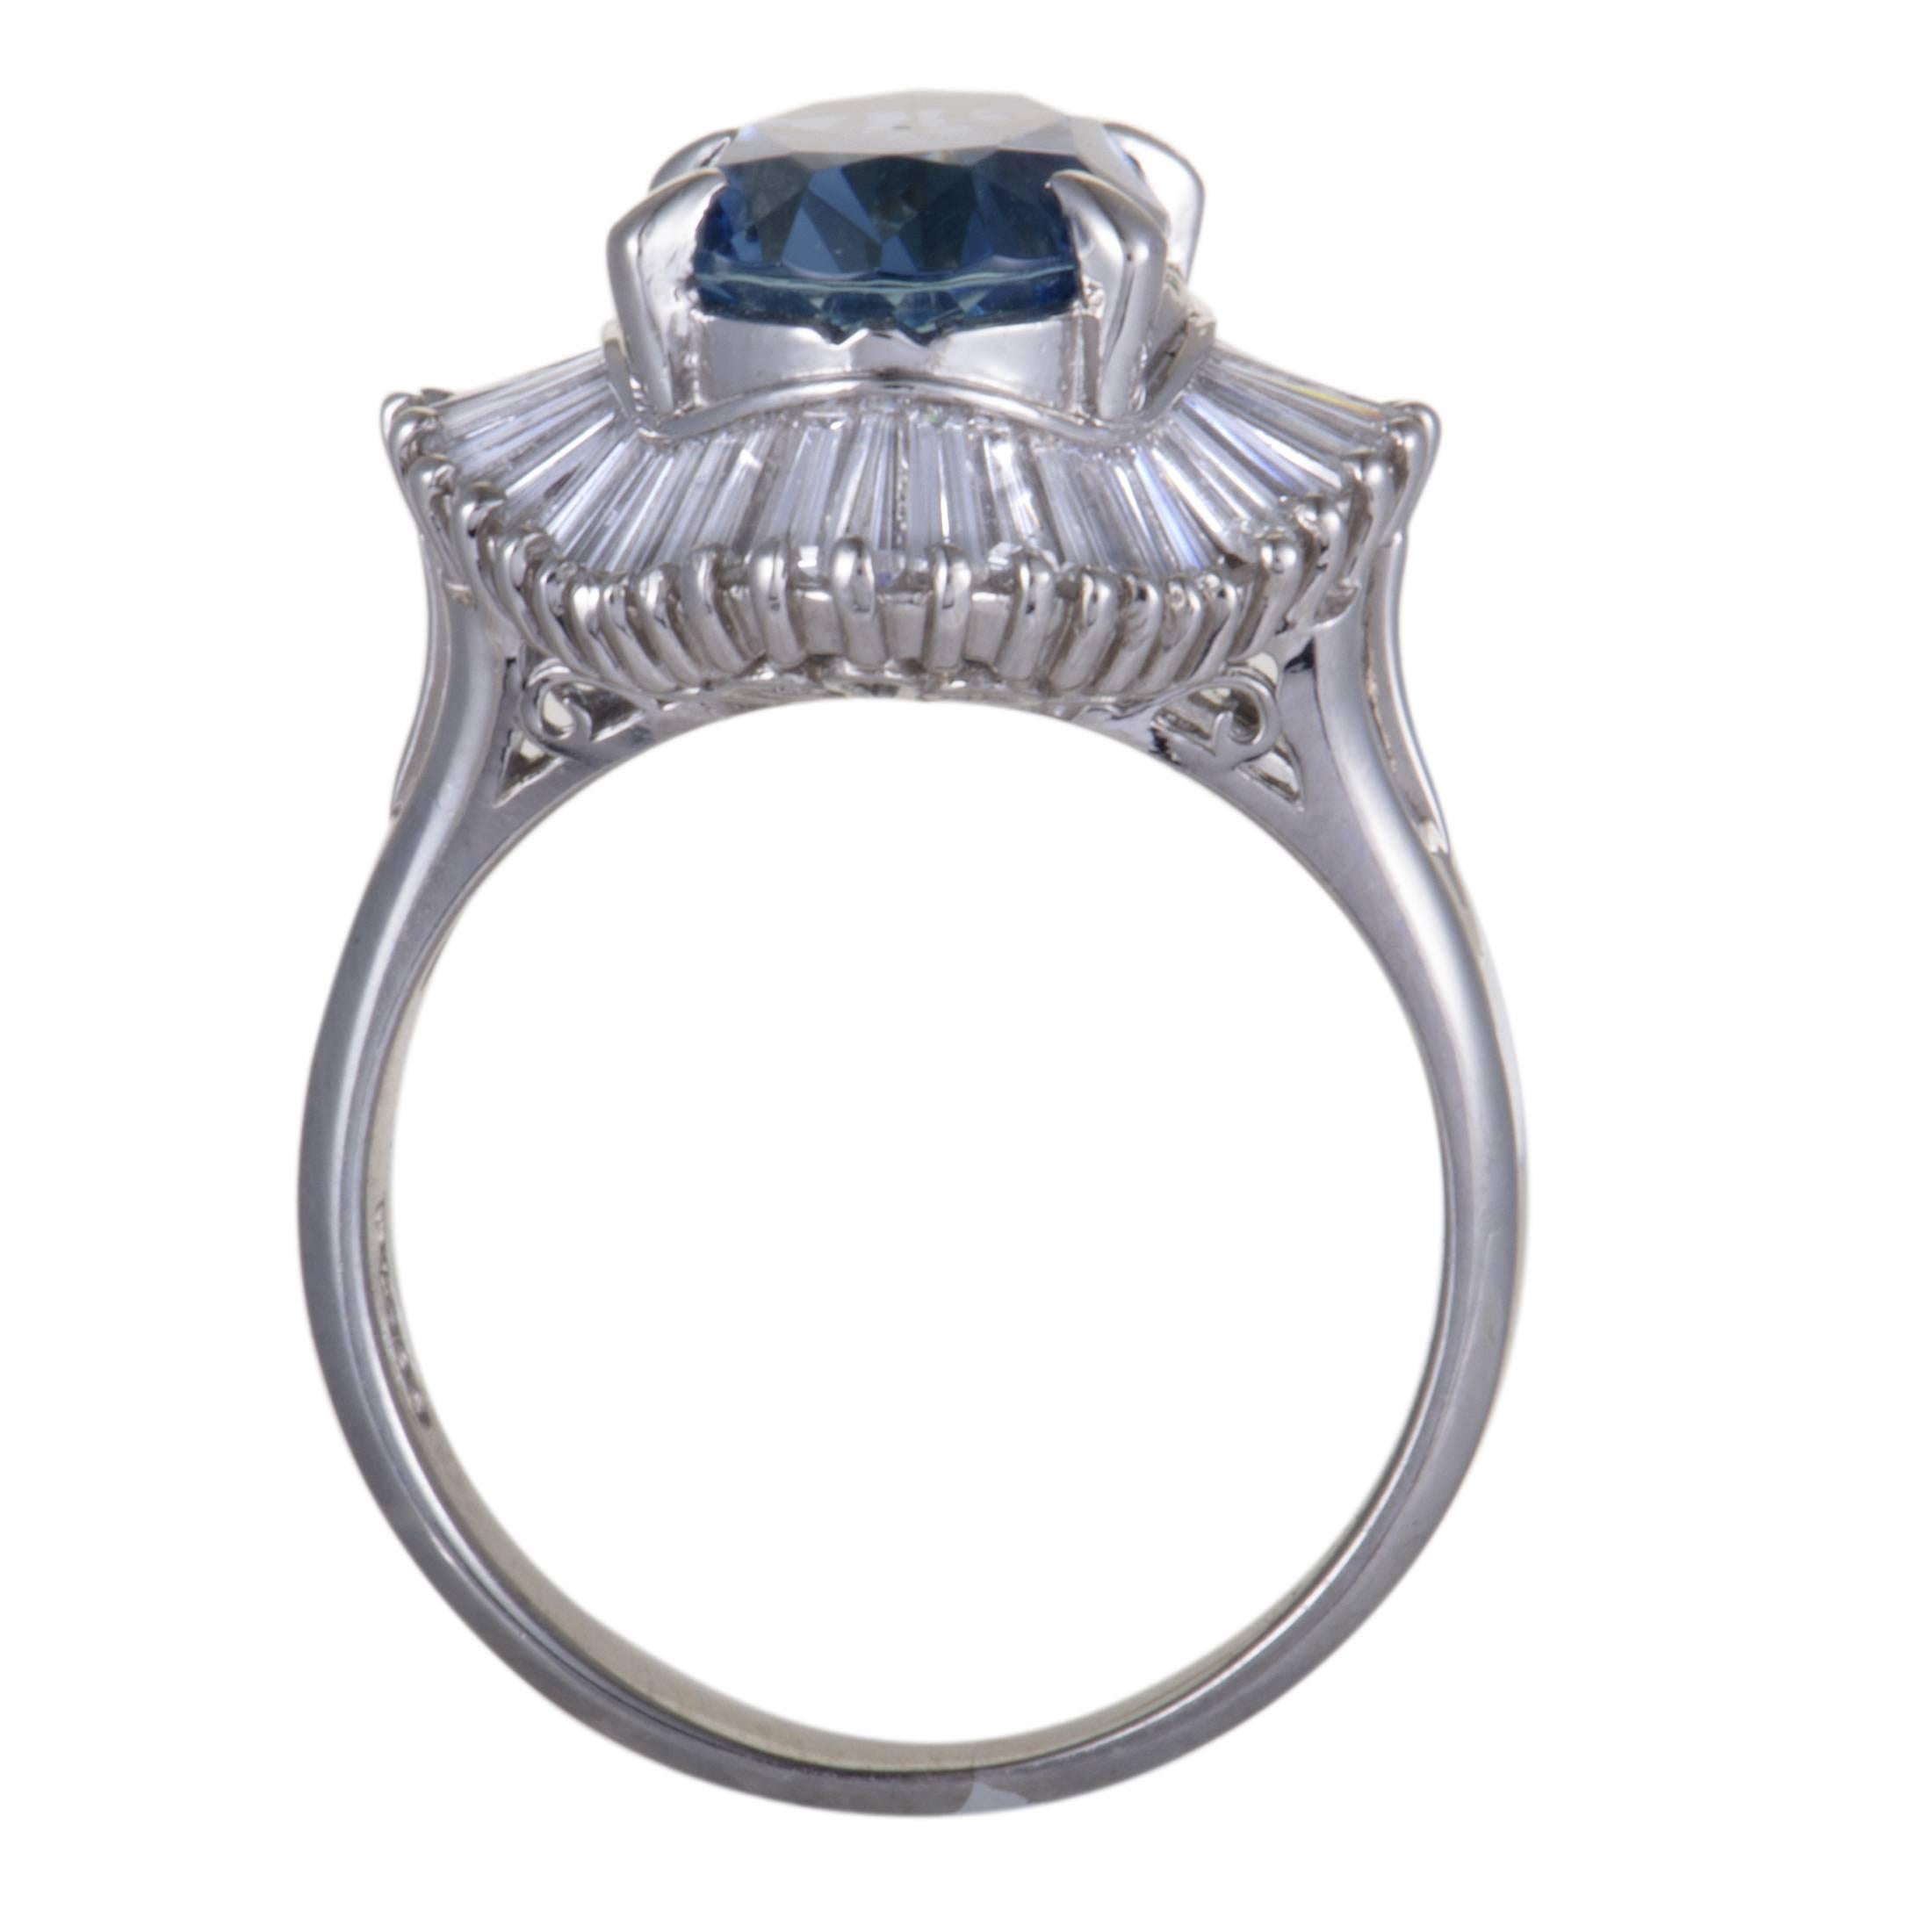 This attractive ring is spectacularly designed in shimmering platinum. The incredible ring features 1.15ct of sparkling diamonds surrounding a mesmerizing aquamarine stone, weighing 3.27ct, in its incredible design that enhance the extravagance of